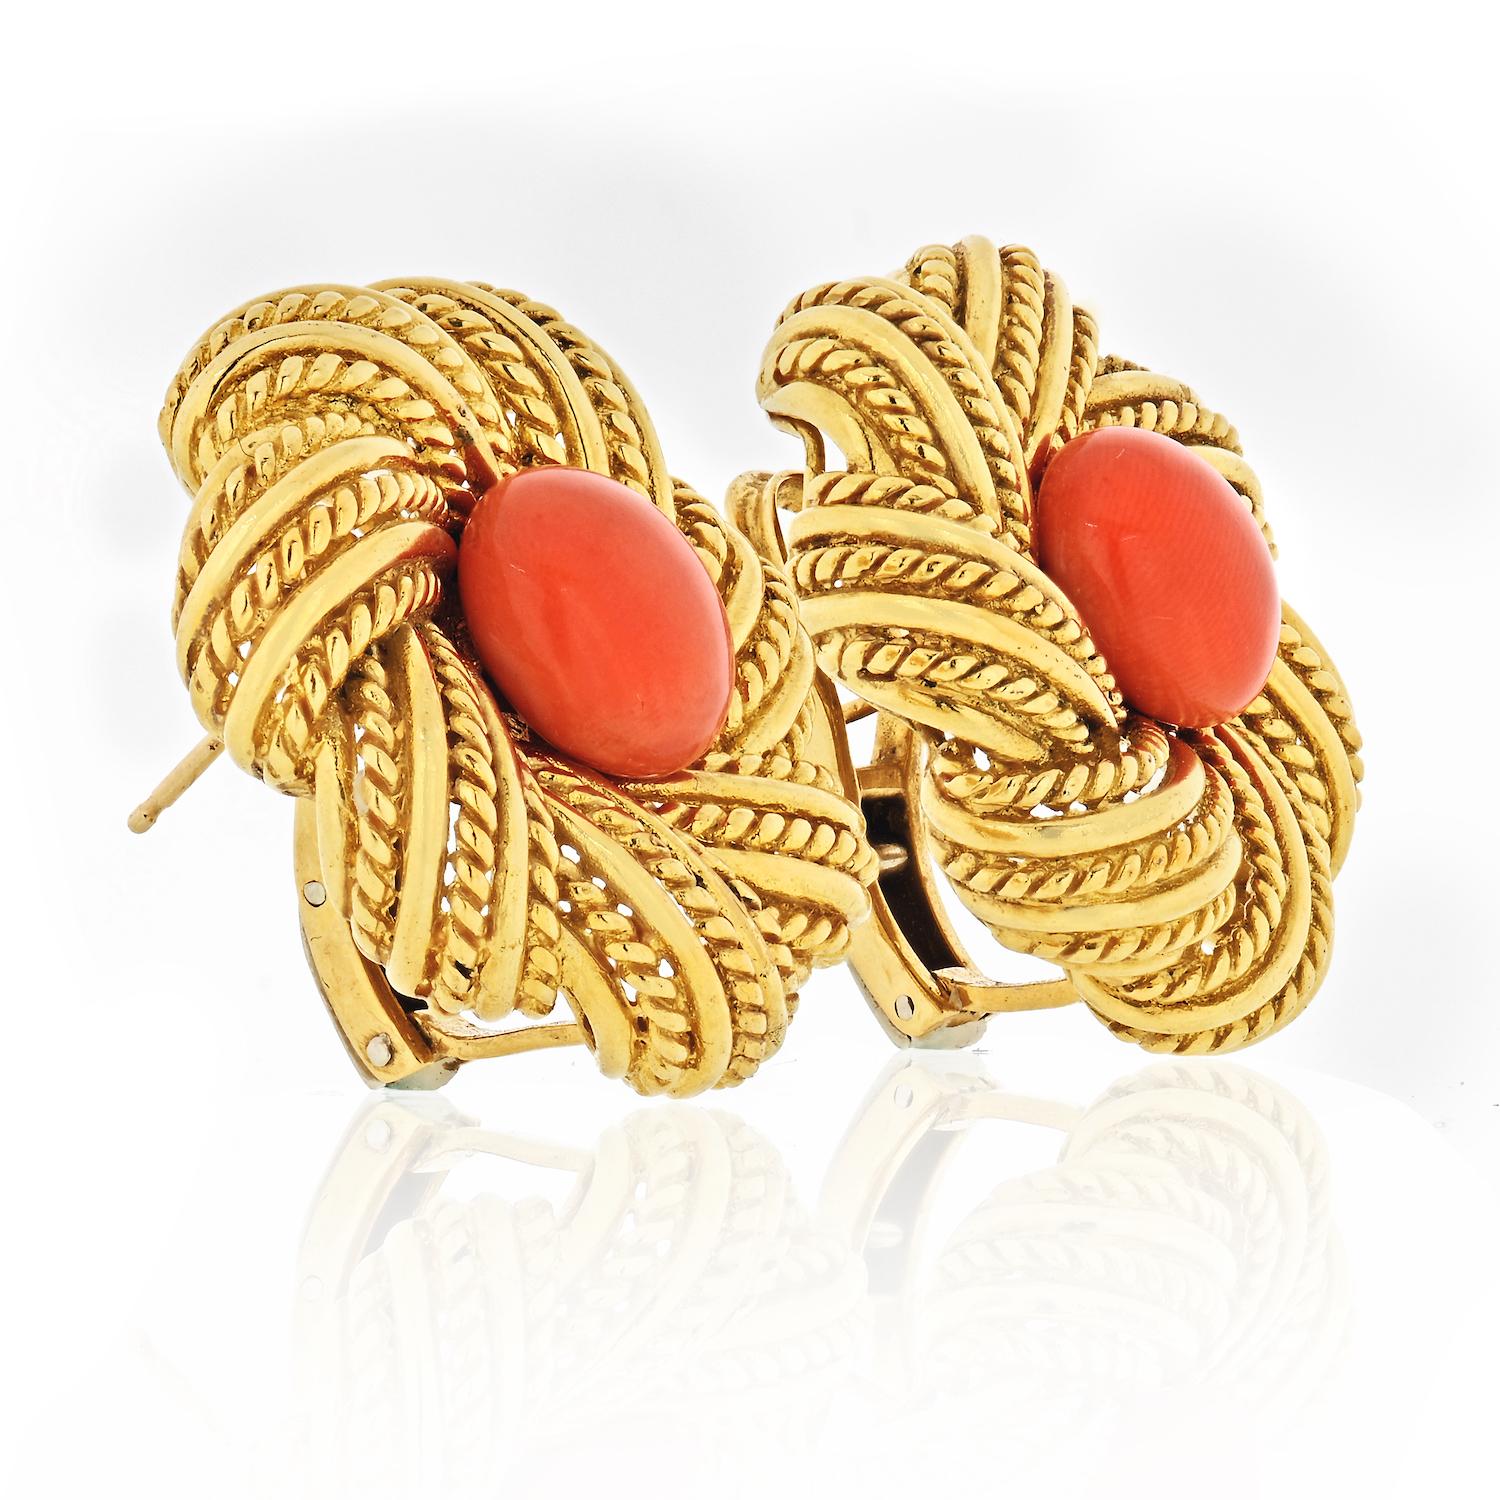 Beautiful vintage earrings by Tiffany & Co crafted in 1970's set with cabochon orange coral and look beautiful today as they did half a century ago. 
For pierced ears.